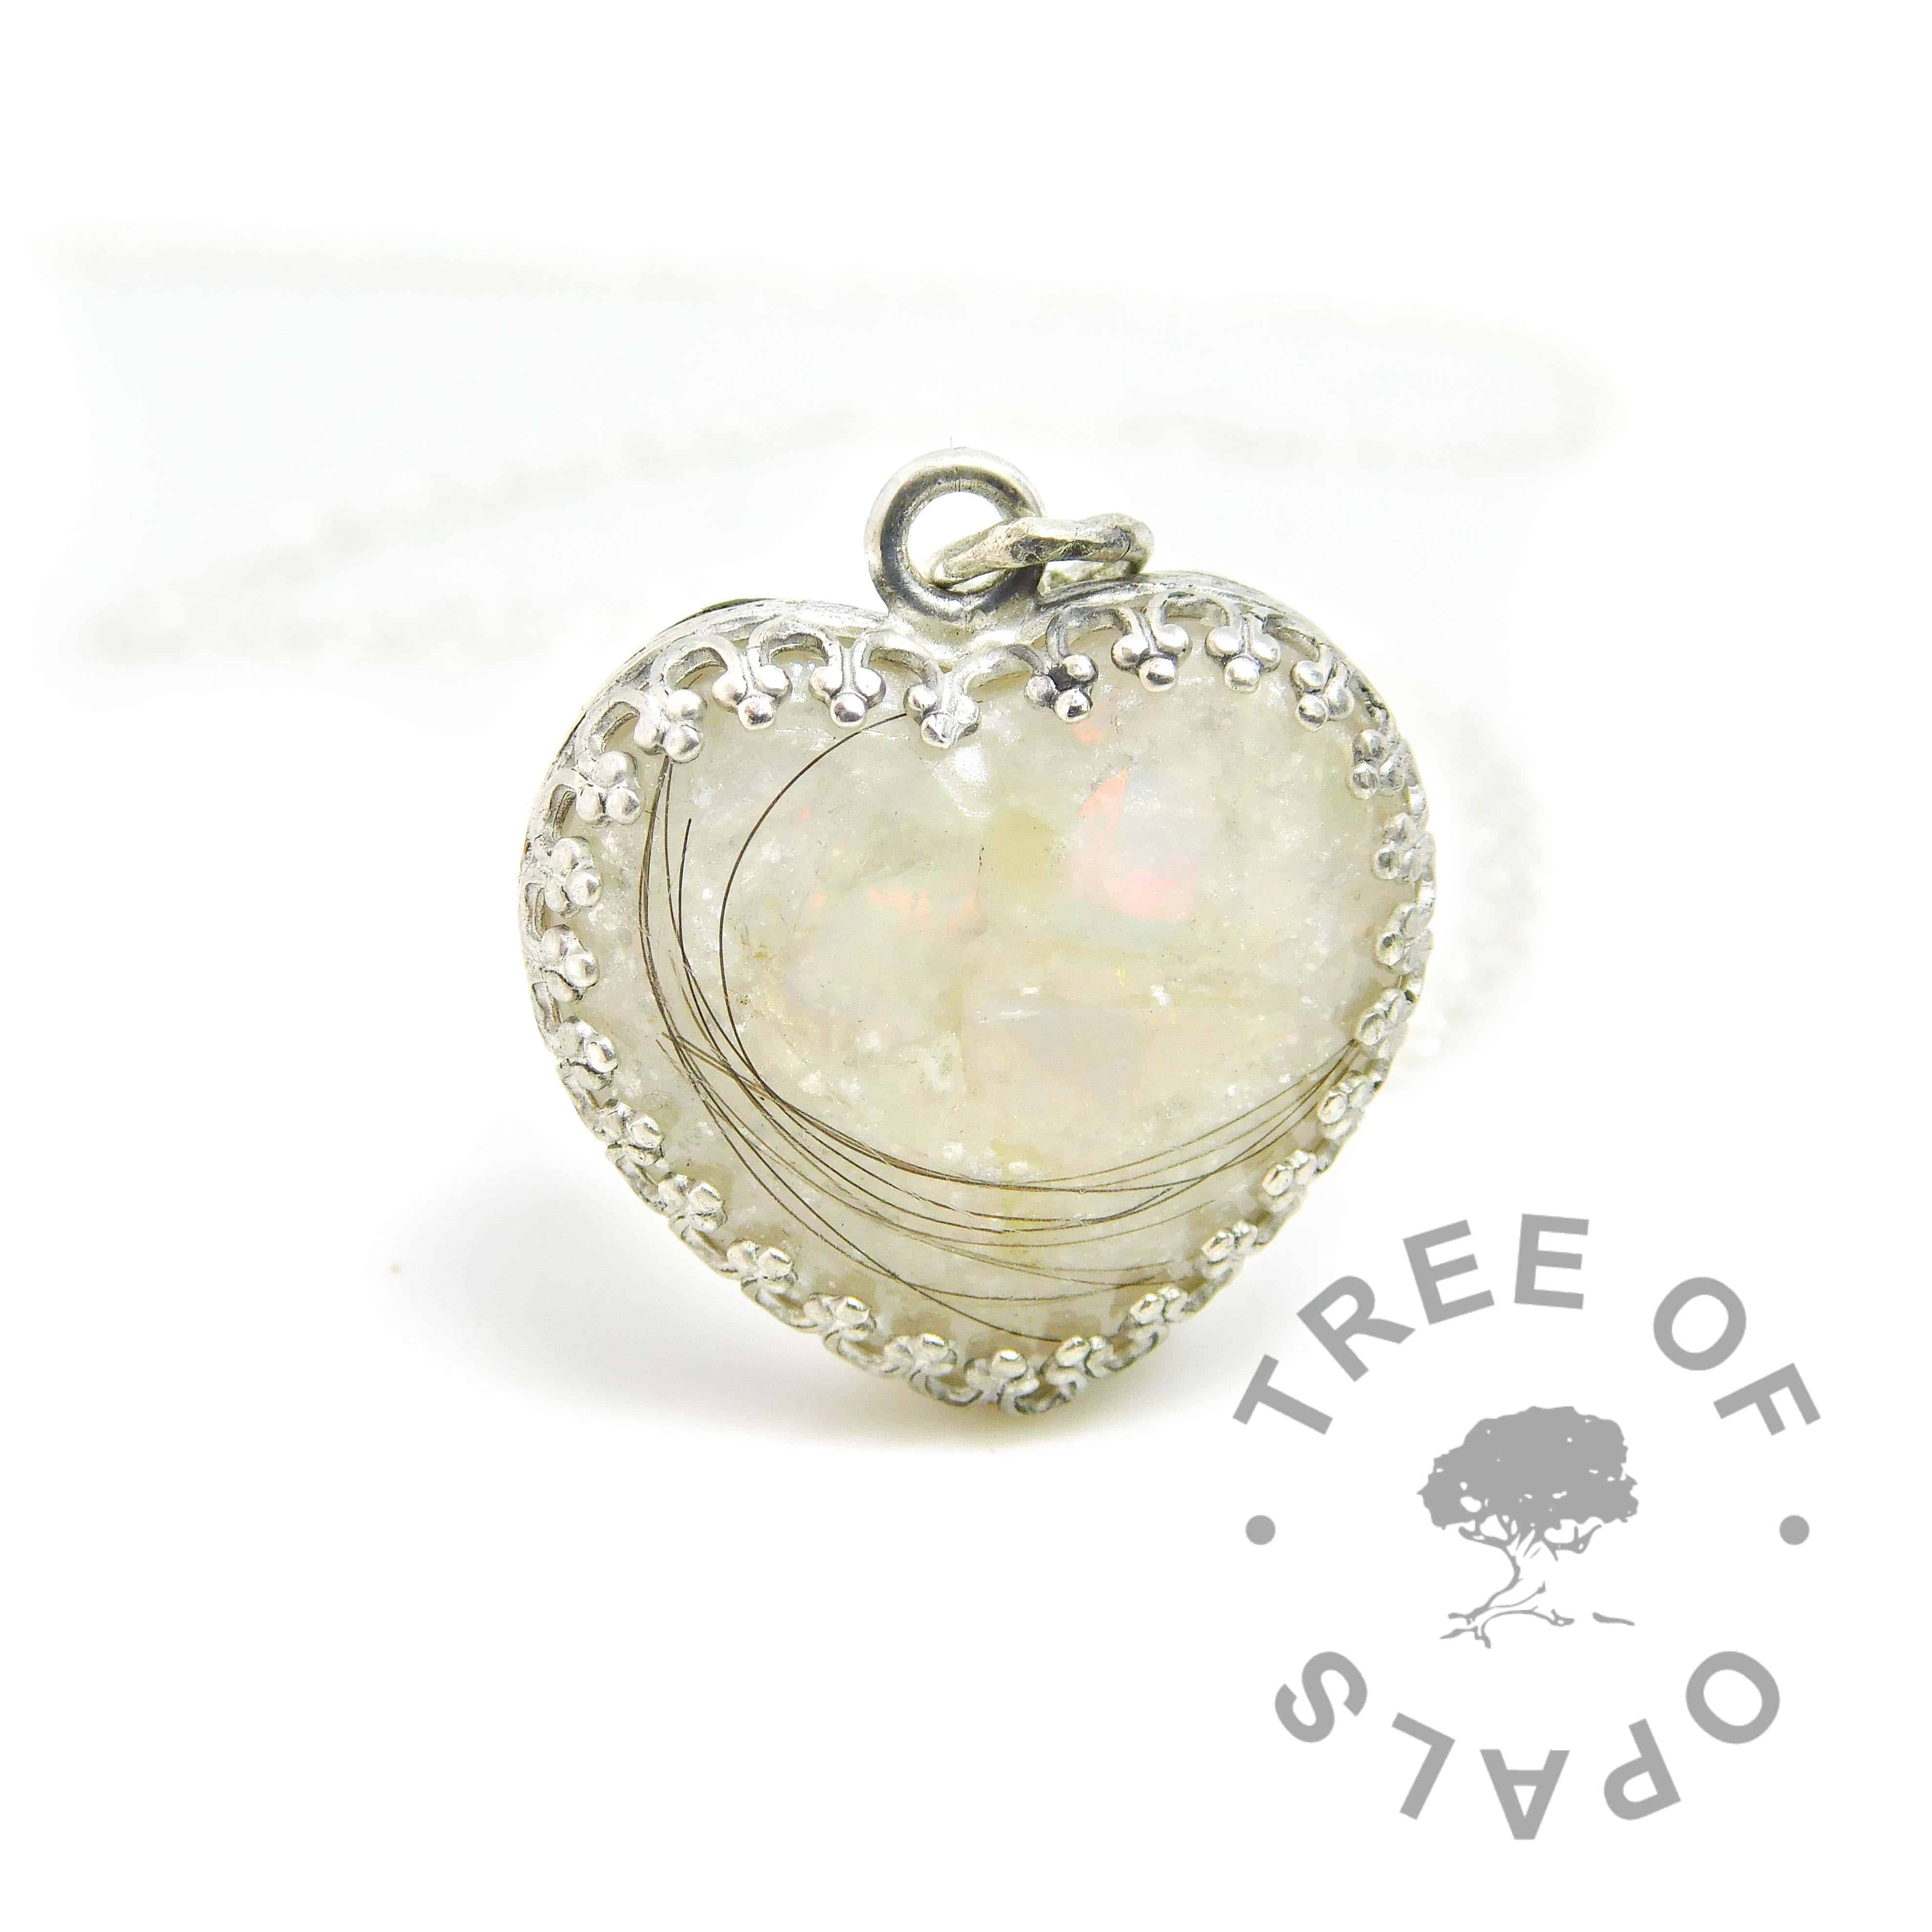 Lock of hair heart necklace with unicorn white resin sparkle mix, rough natural opal slices October birthstone. Solid sterling silver 20mm crown point heart setting (925 stamped on the back). Lightweight classic necklace chain included. Watermarked copyright Tree of Opals memorial jewellery image